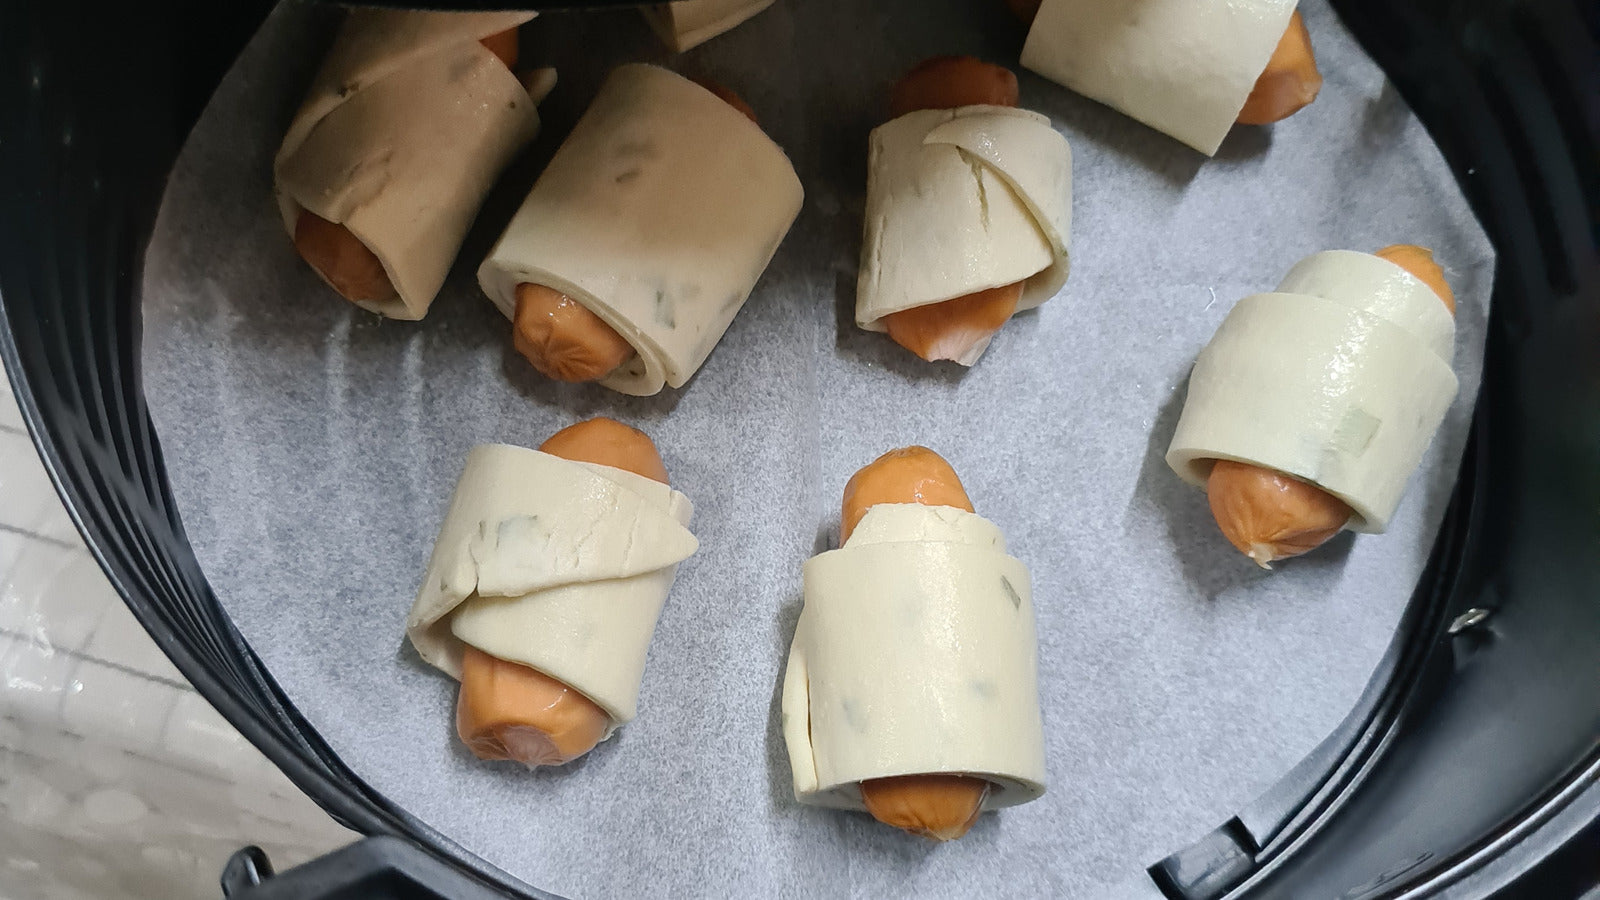 Best Alternatives To Parchment Paper In Air Fryer